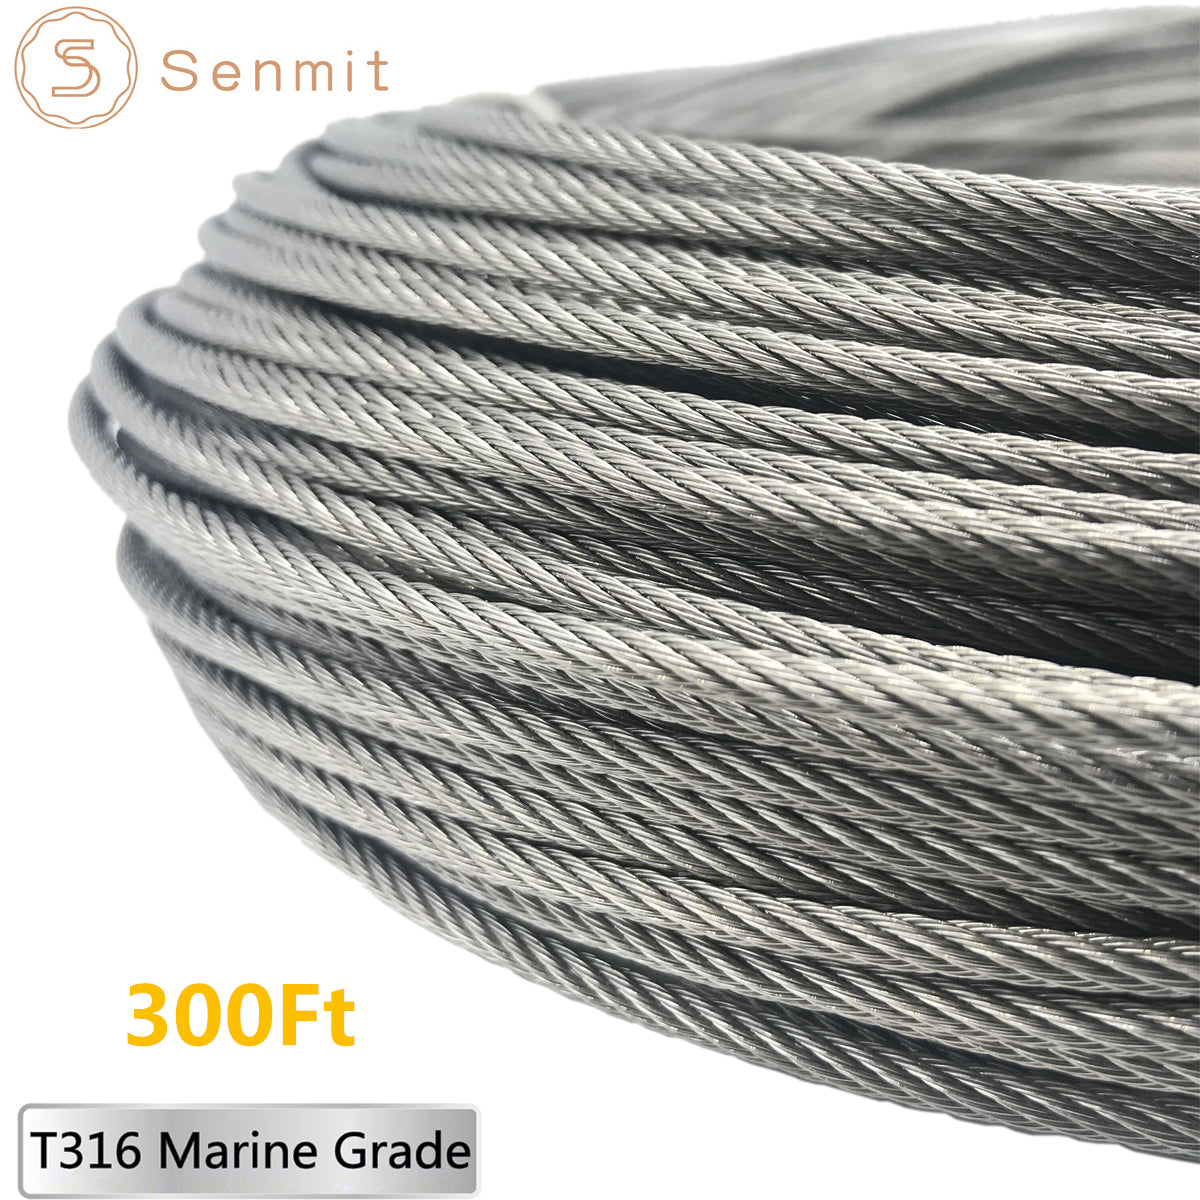 Deck Chandelier Guides Xtili T316 Stainless Steel 1000FT 1/8inch 7X7Strands Construction Aircraft Wire Rope for Cable Railing Kit,DIY,Marine Grade,Wire guardrails Clothesline Cable 